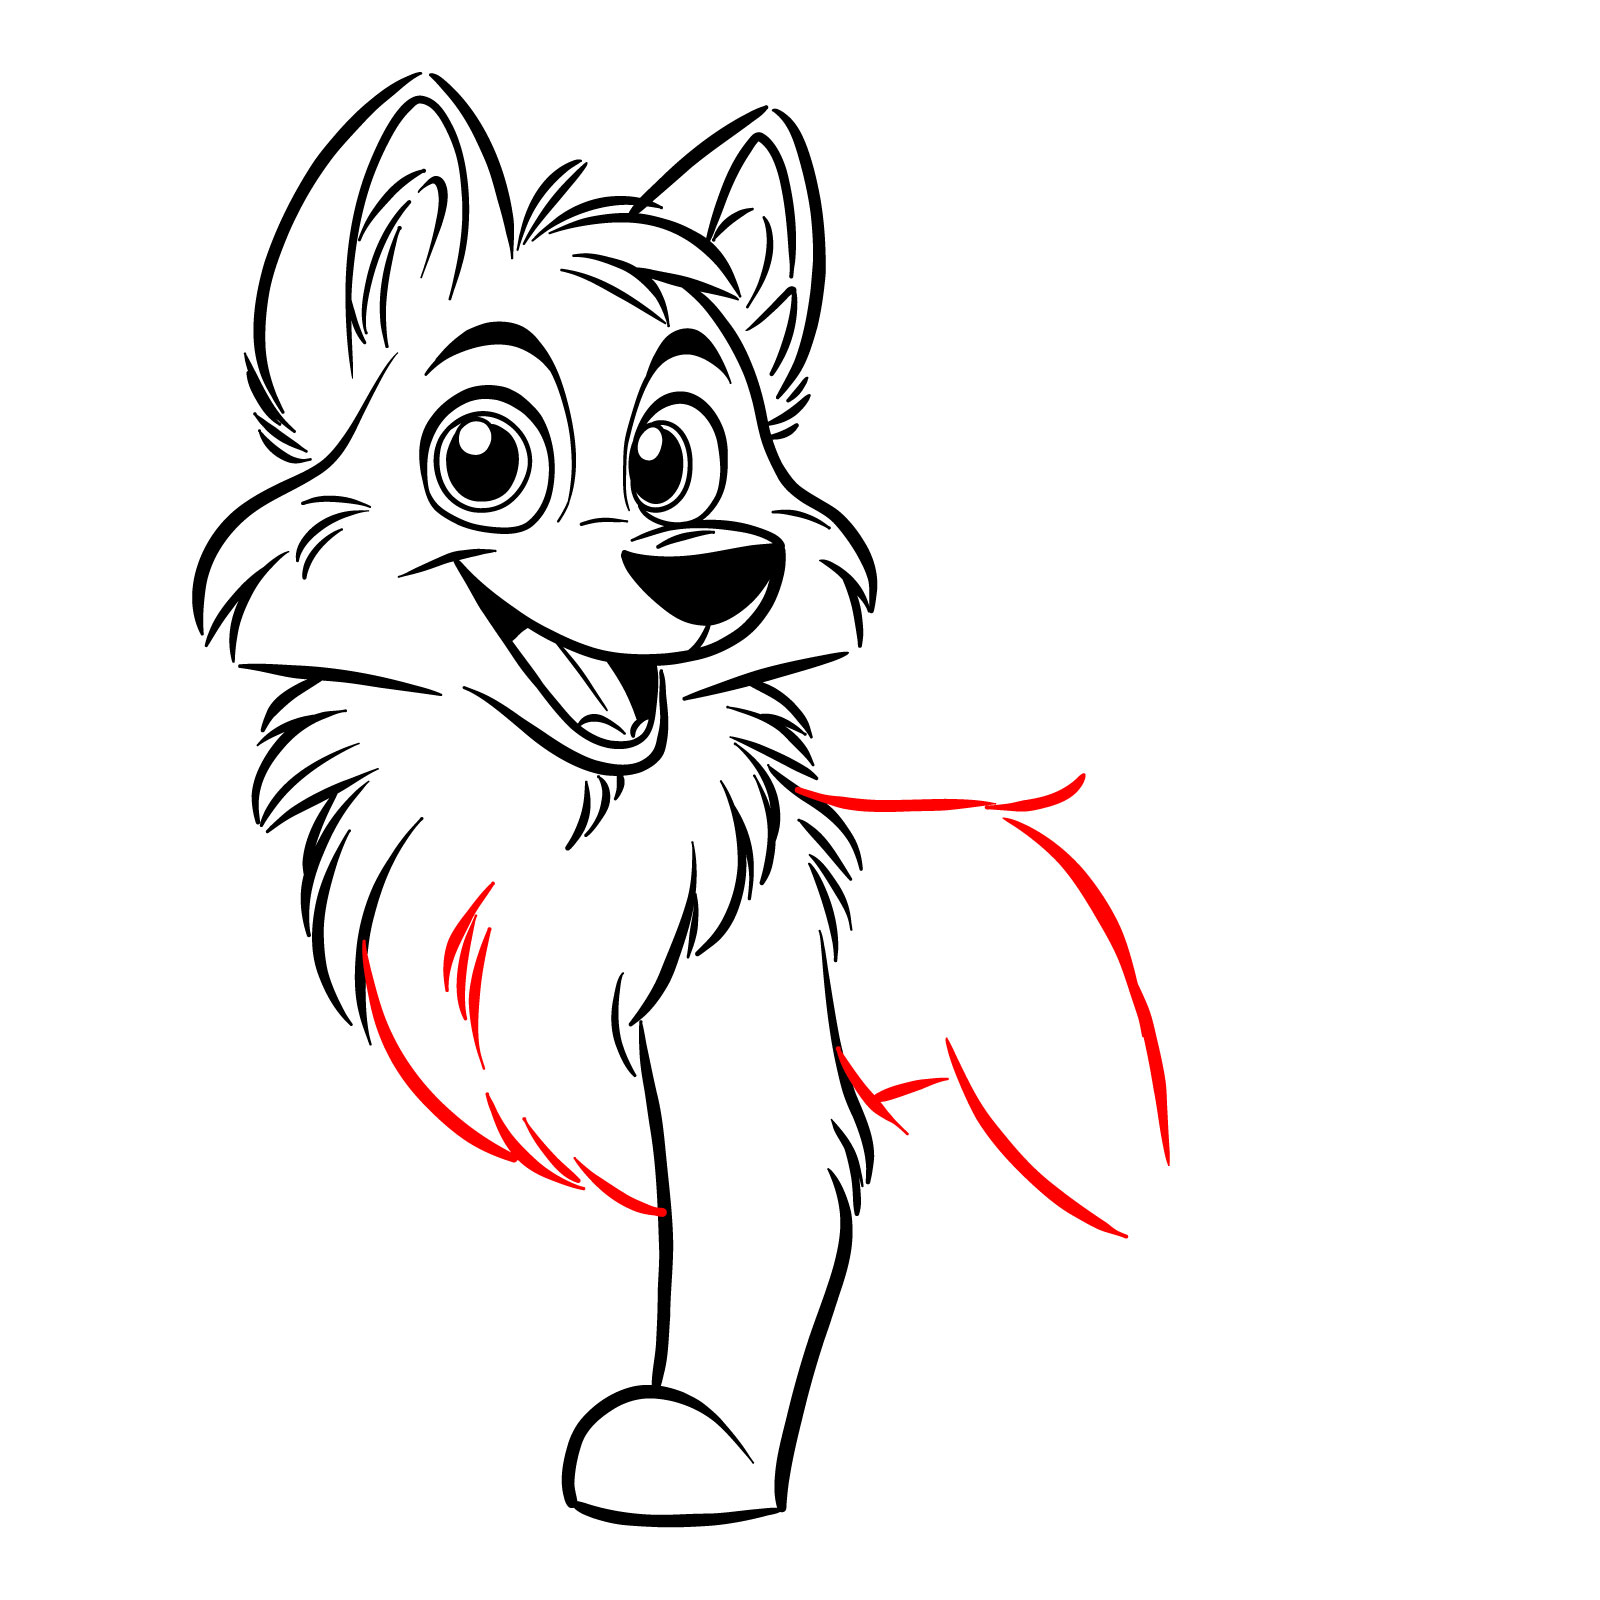 Drafting the body and initial rear leg shape of a cartoon wolf - step 12